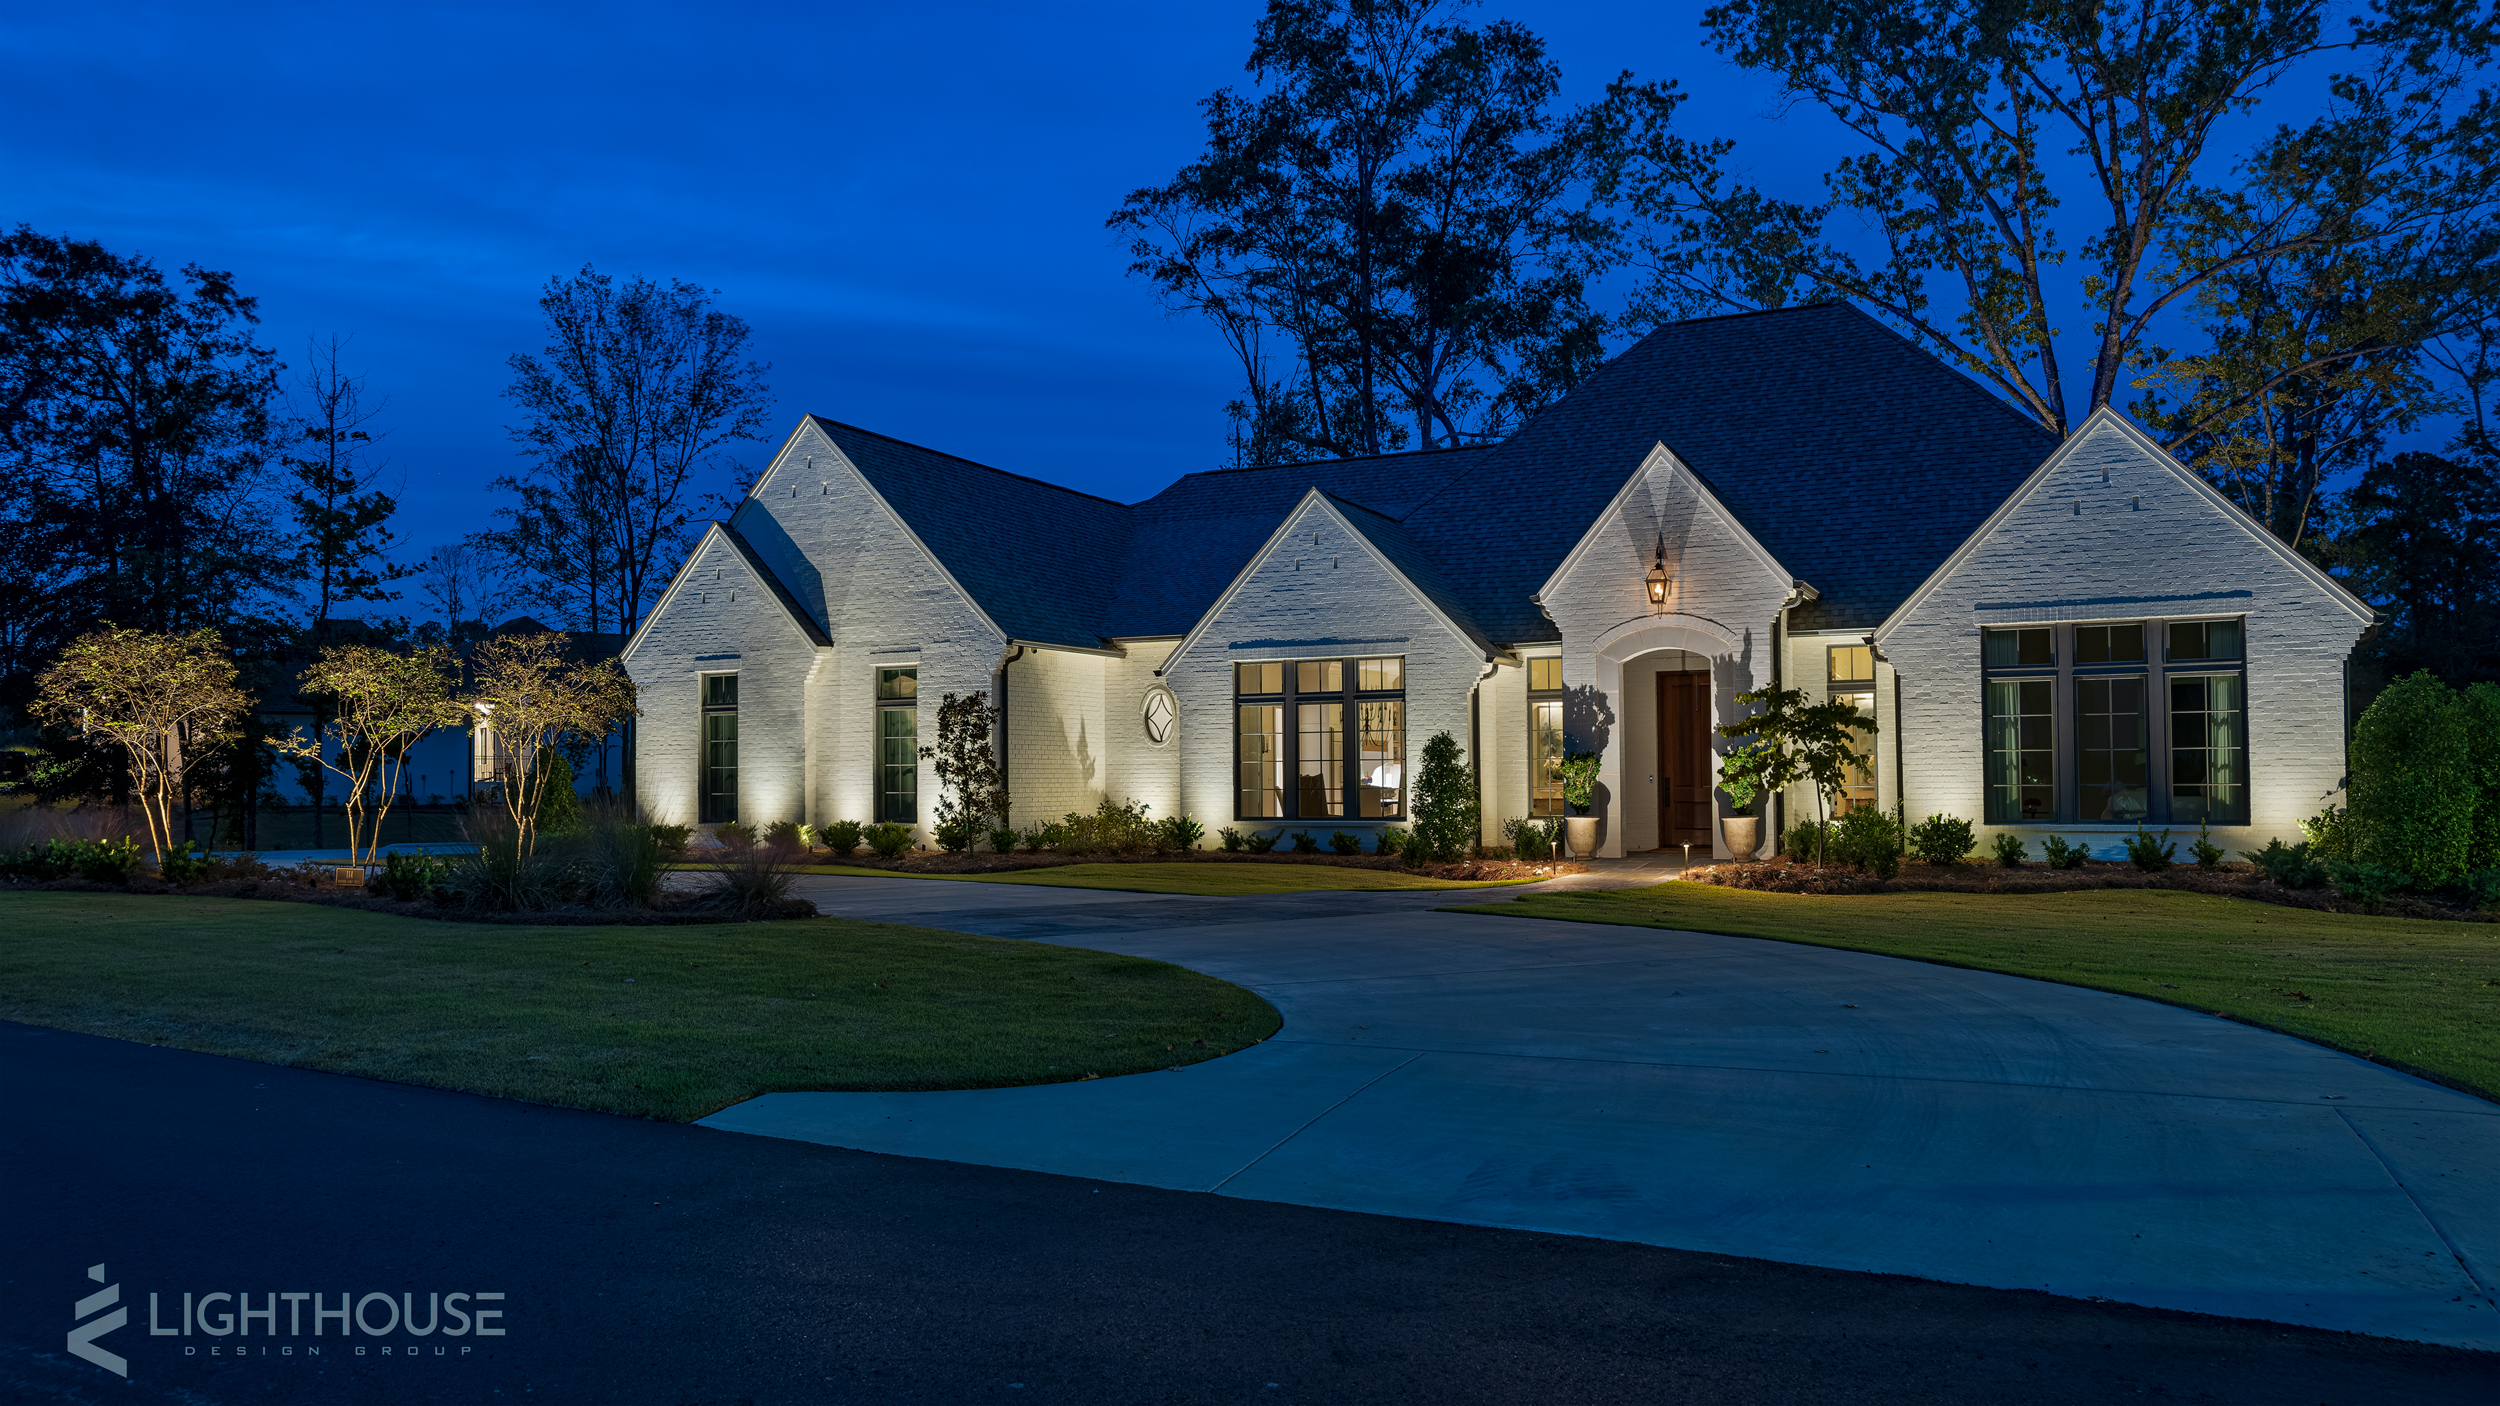 Low Voltage up-lighting in White Pine, TN